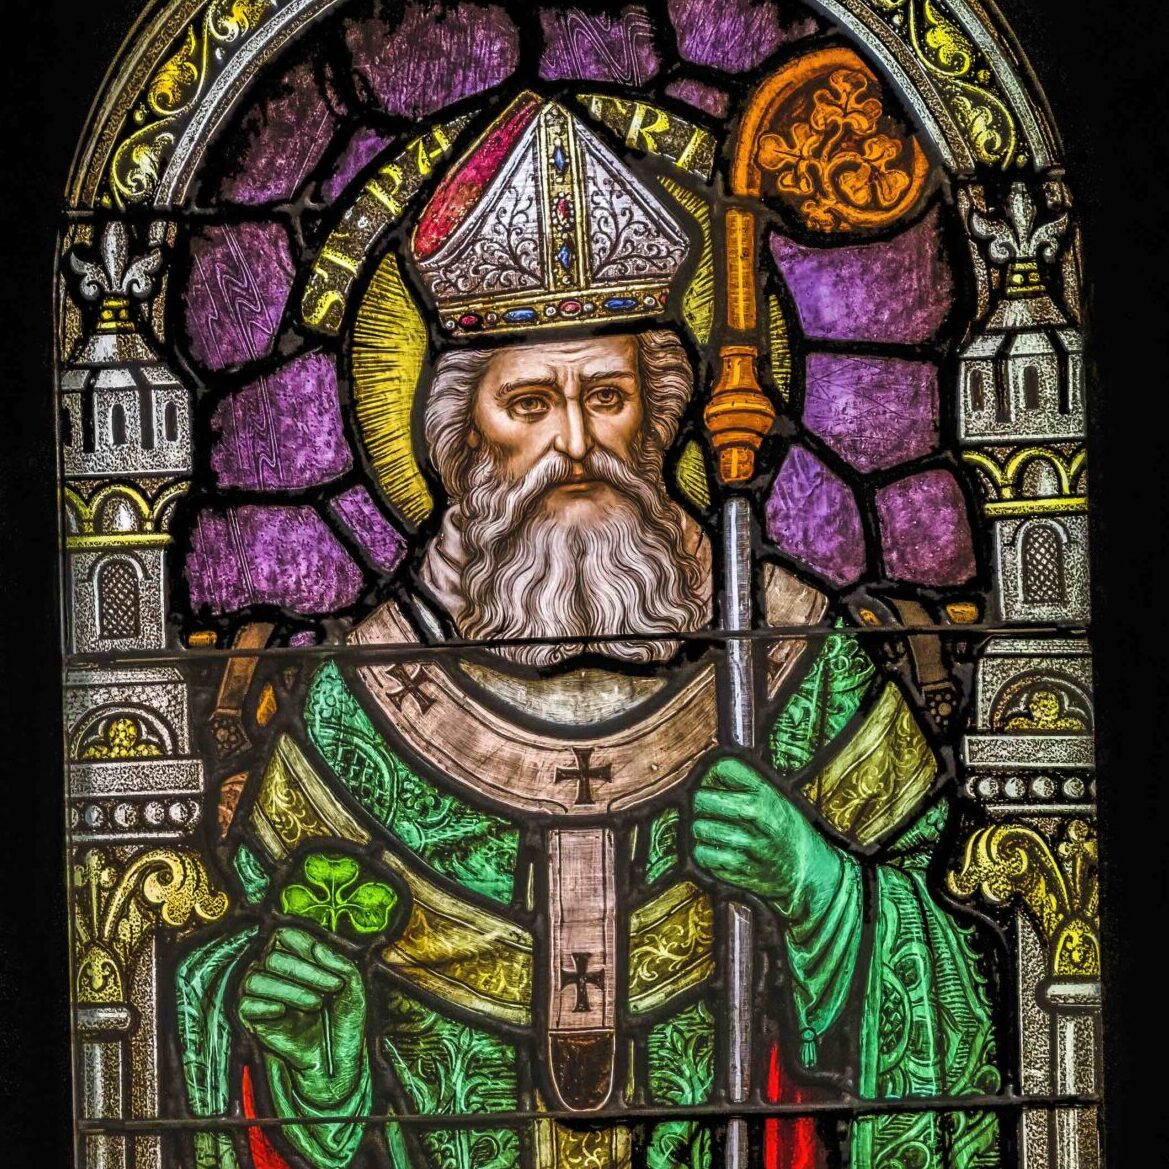 Stained glass window of St. Patrick.